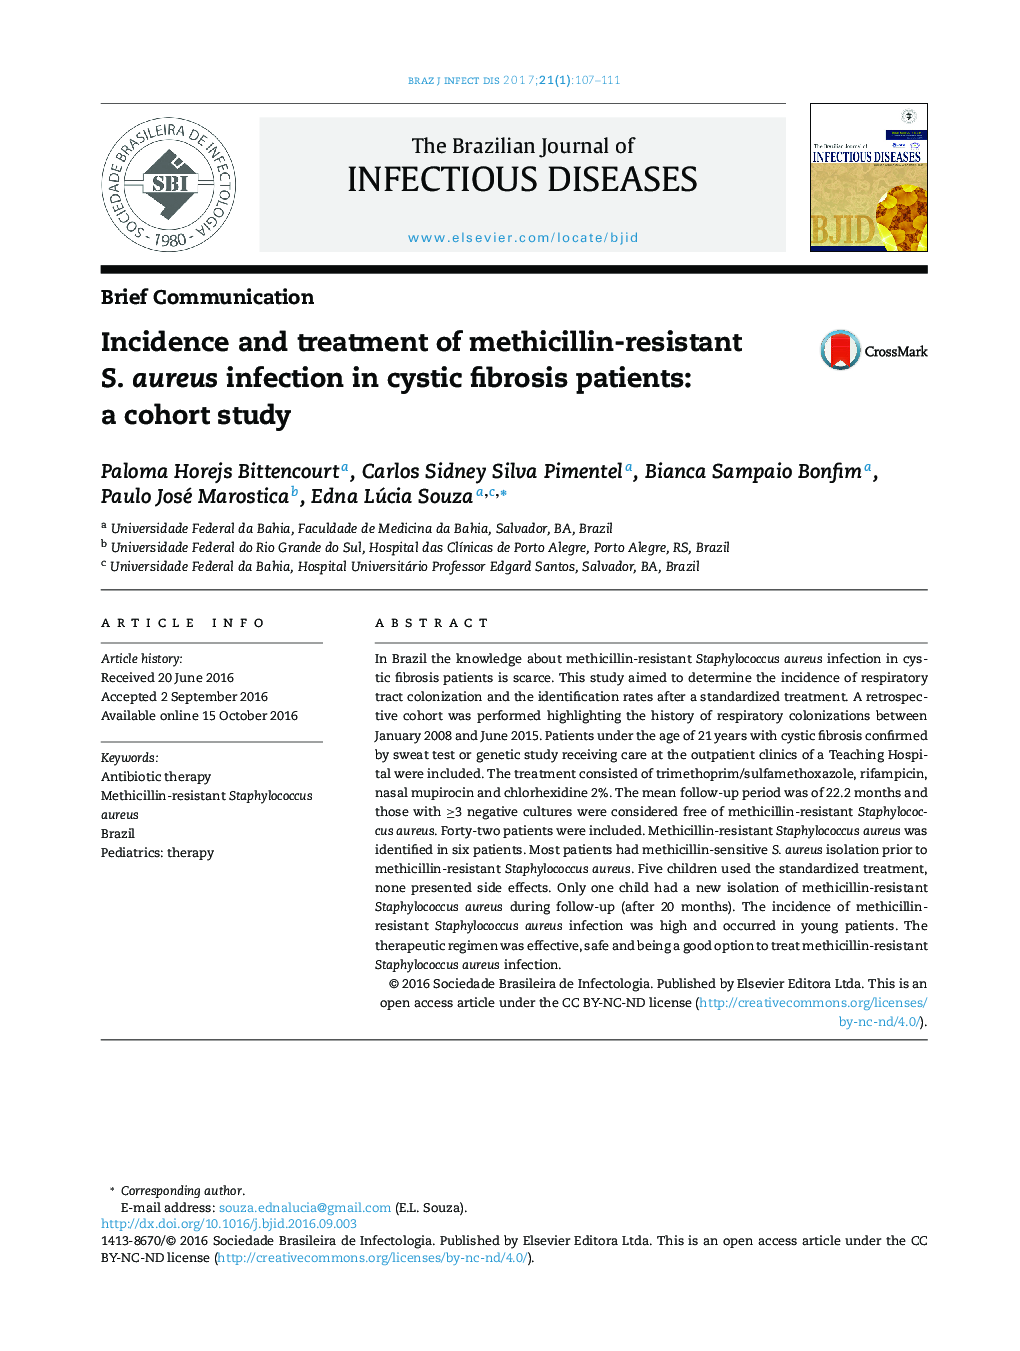 Incidence and treatment of methicillin-resistant S. aureus infection in cystic fibrosis patients: a cohort study